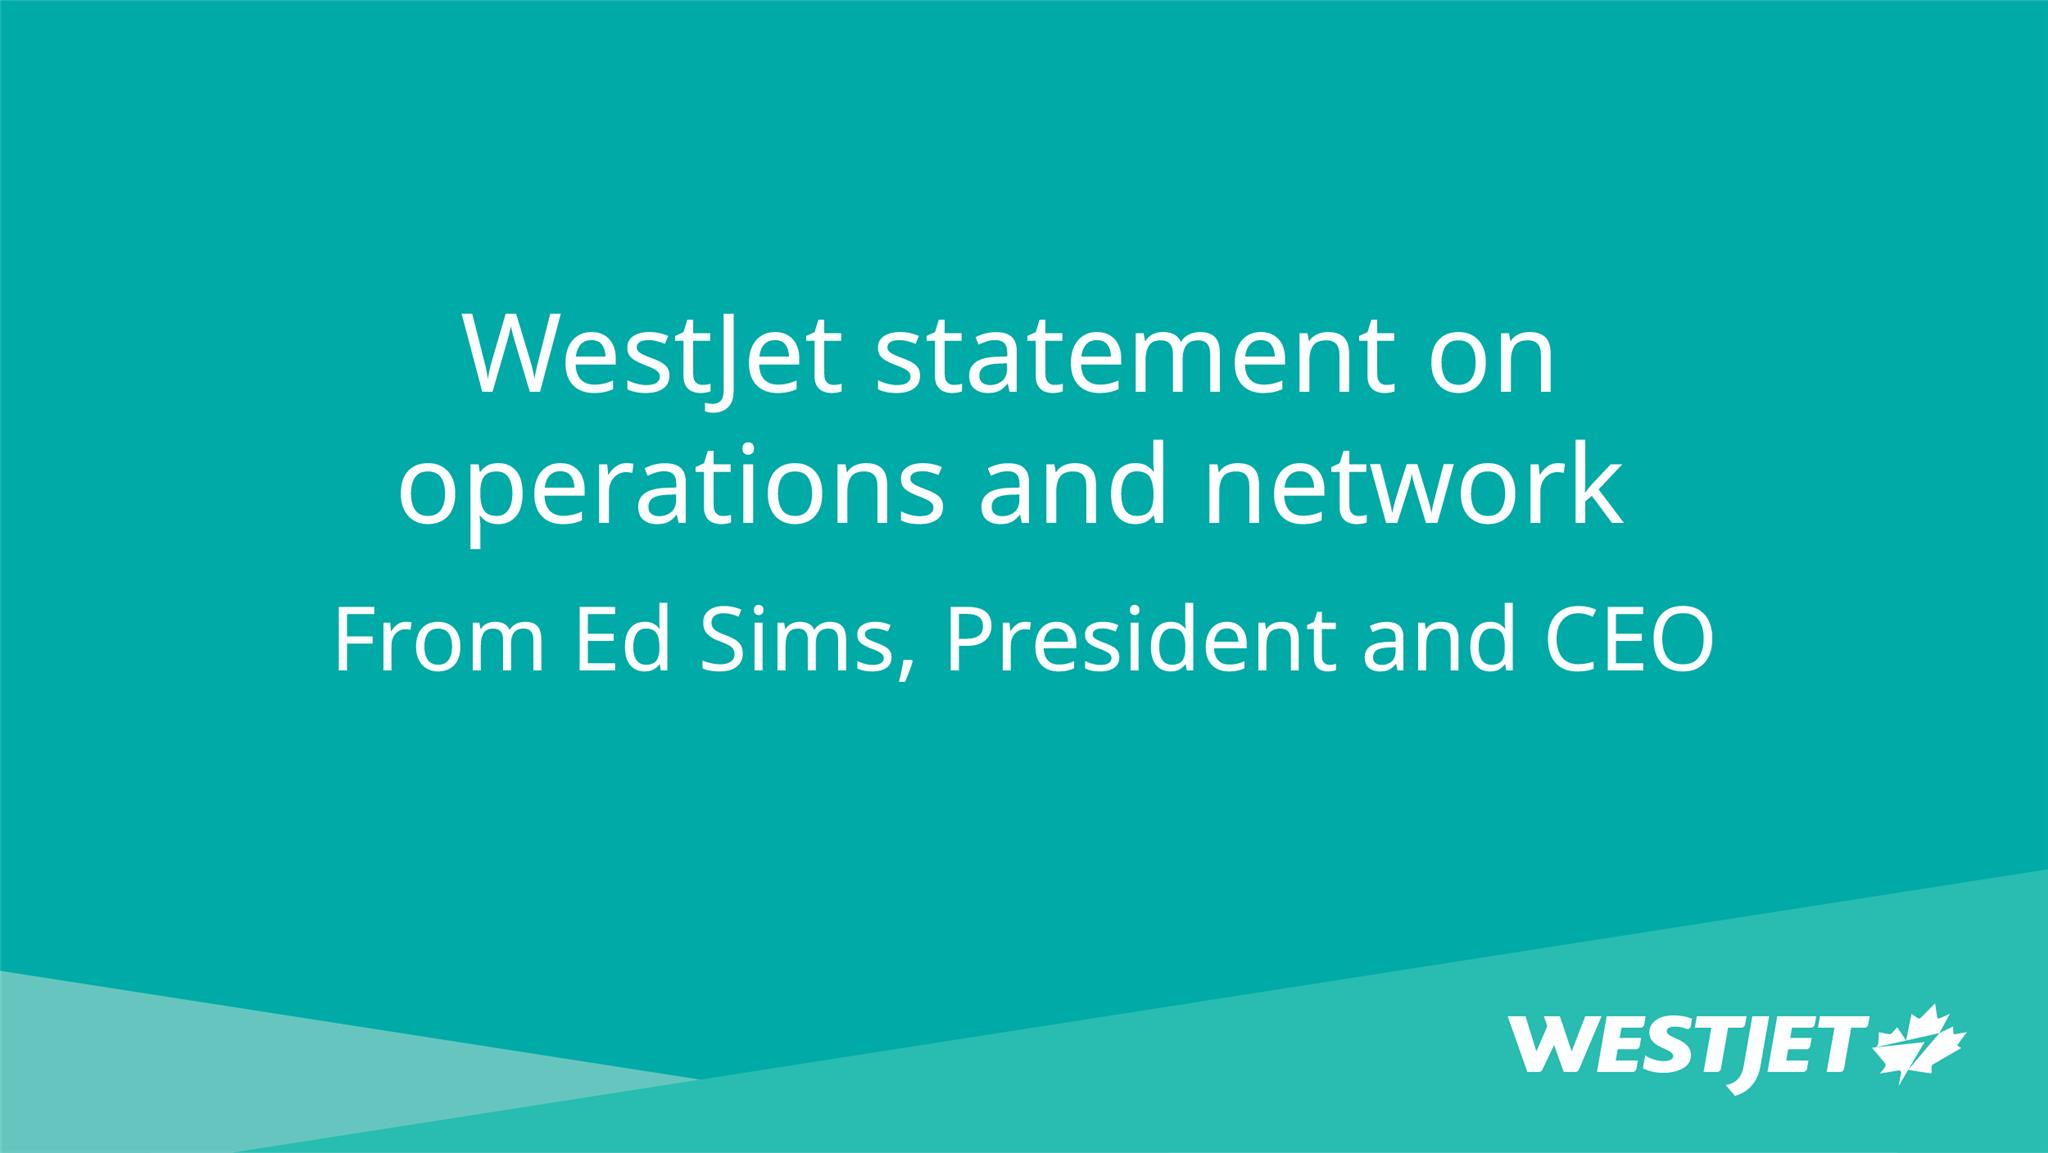 WestJet statement on operations and network from Ed Sims, President and CEO